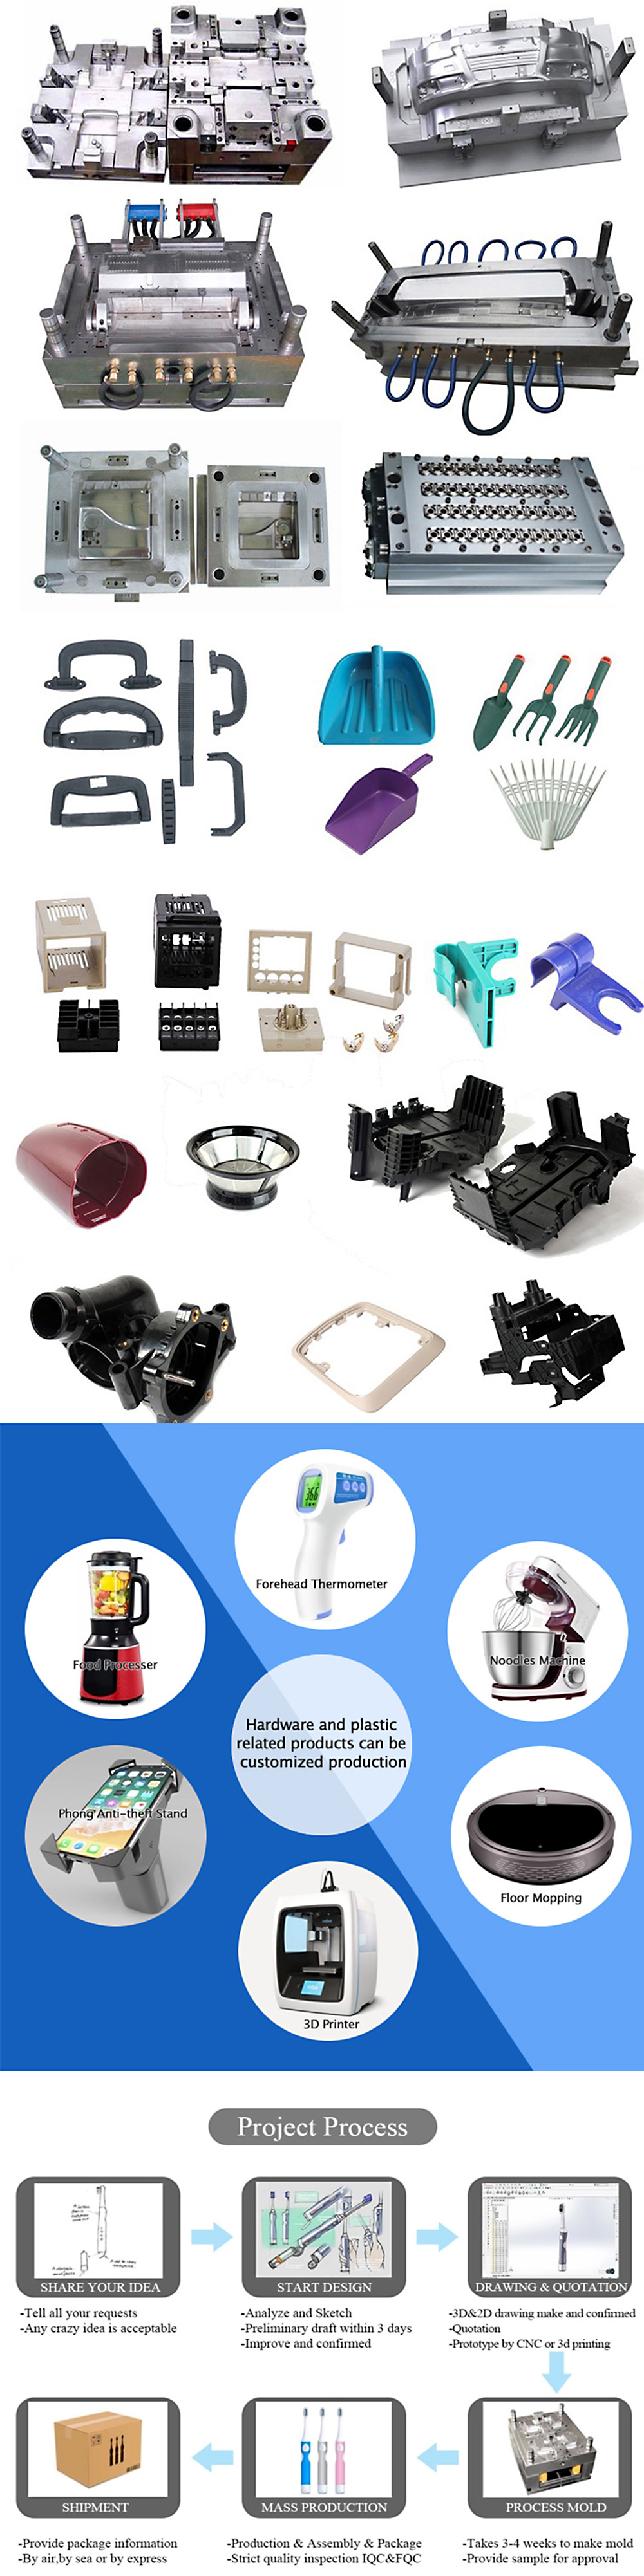 abs plastic injection molding | custom injection molded small plastic parts | plastic molds injection molding